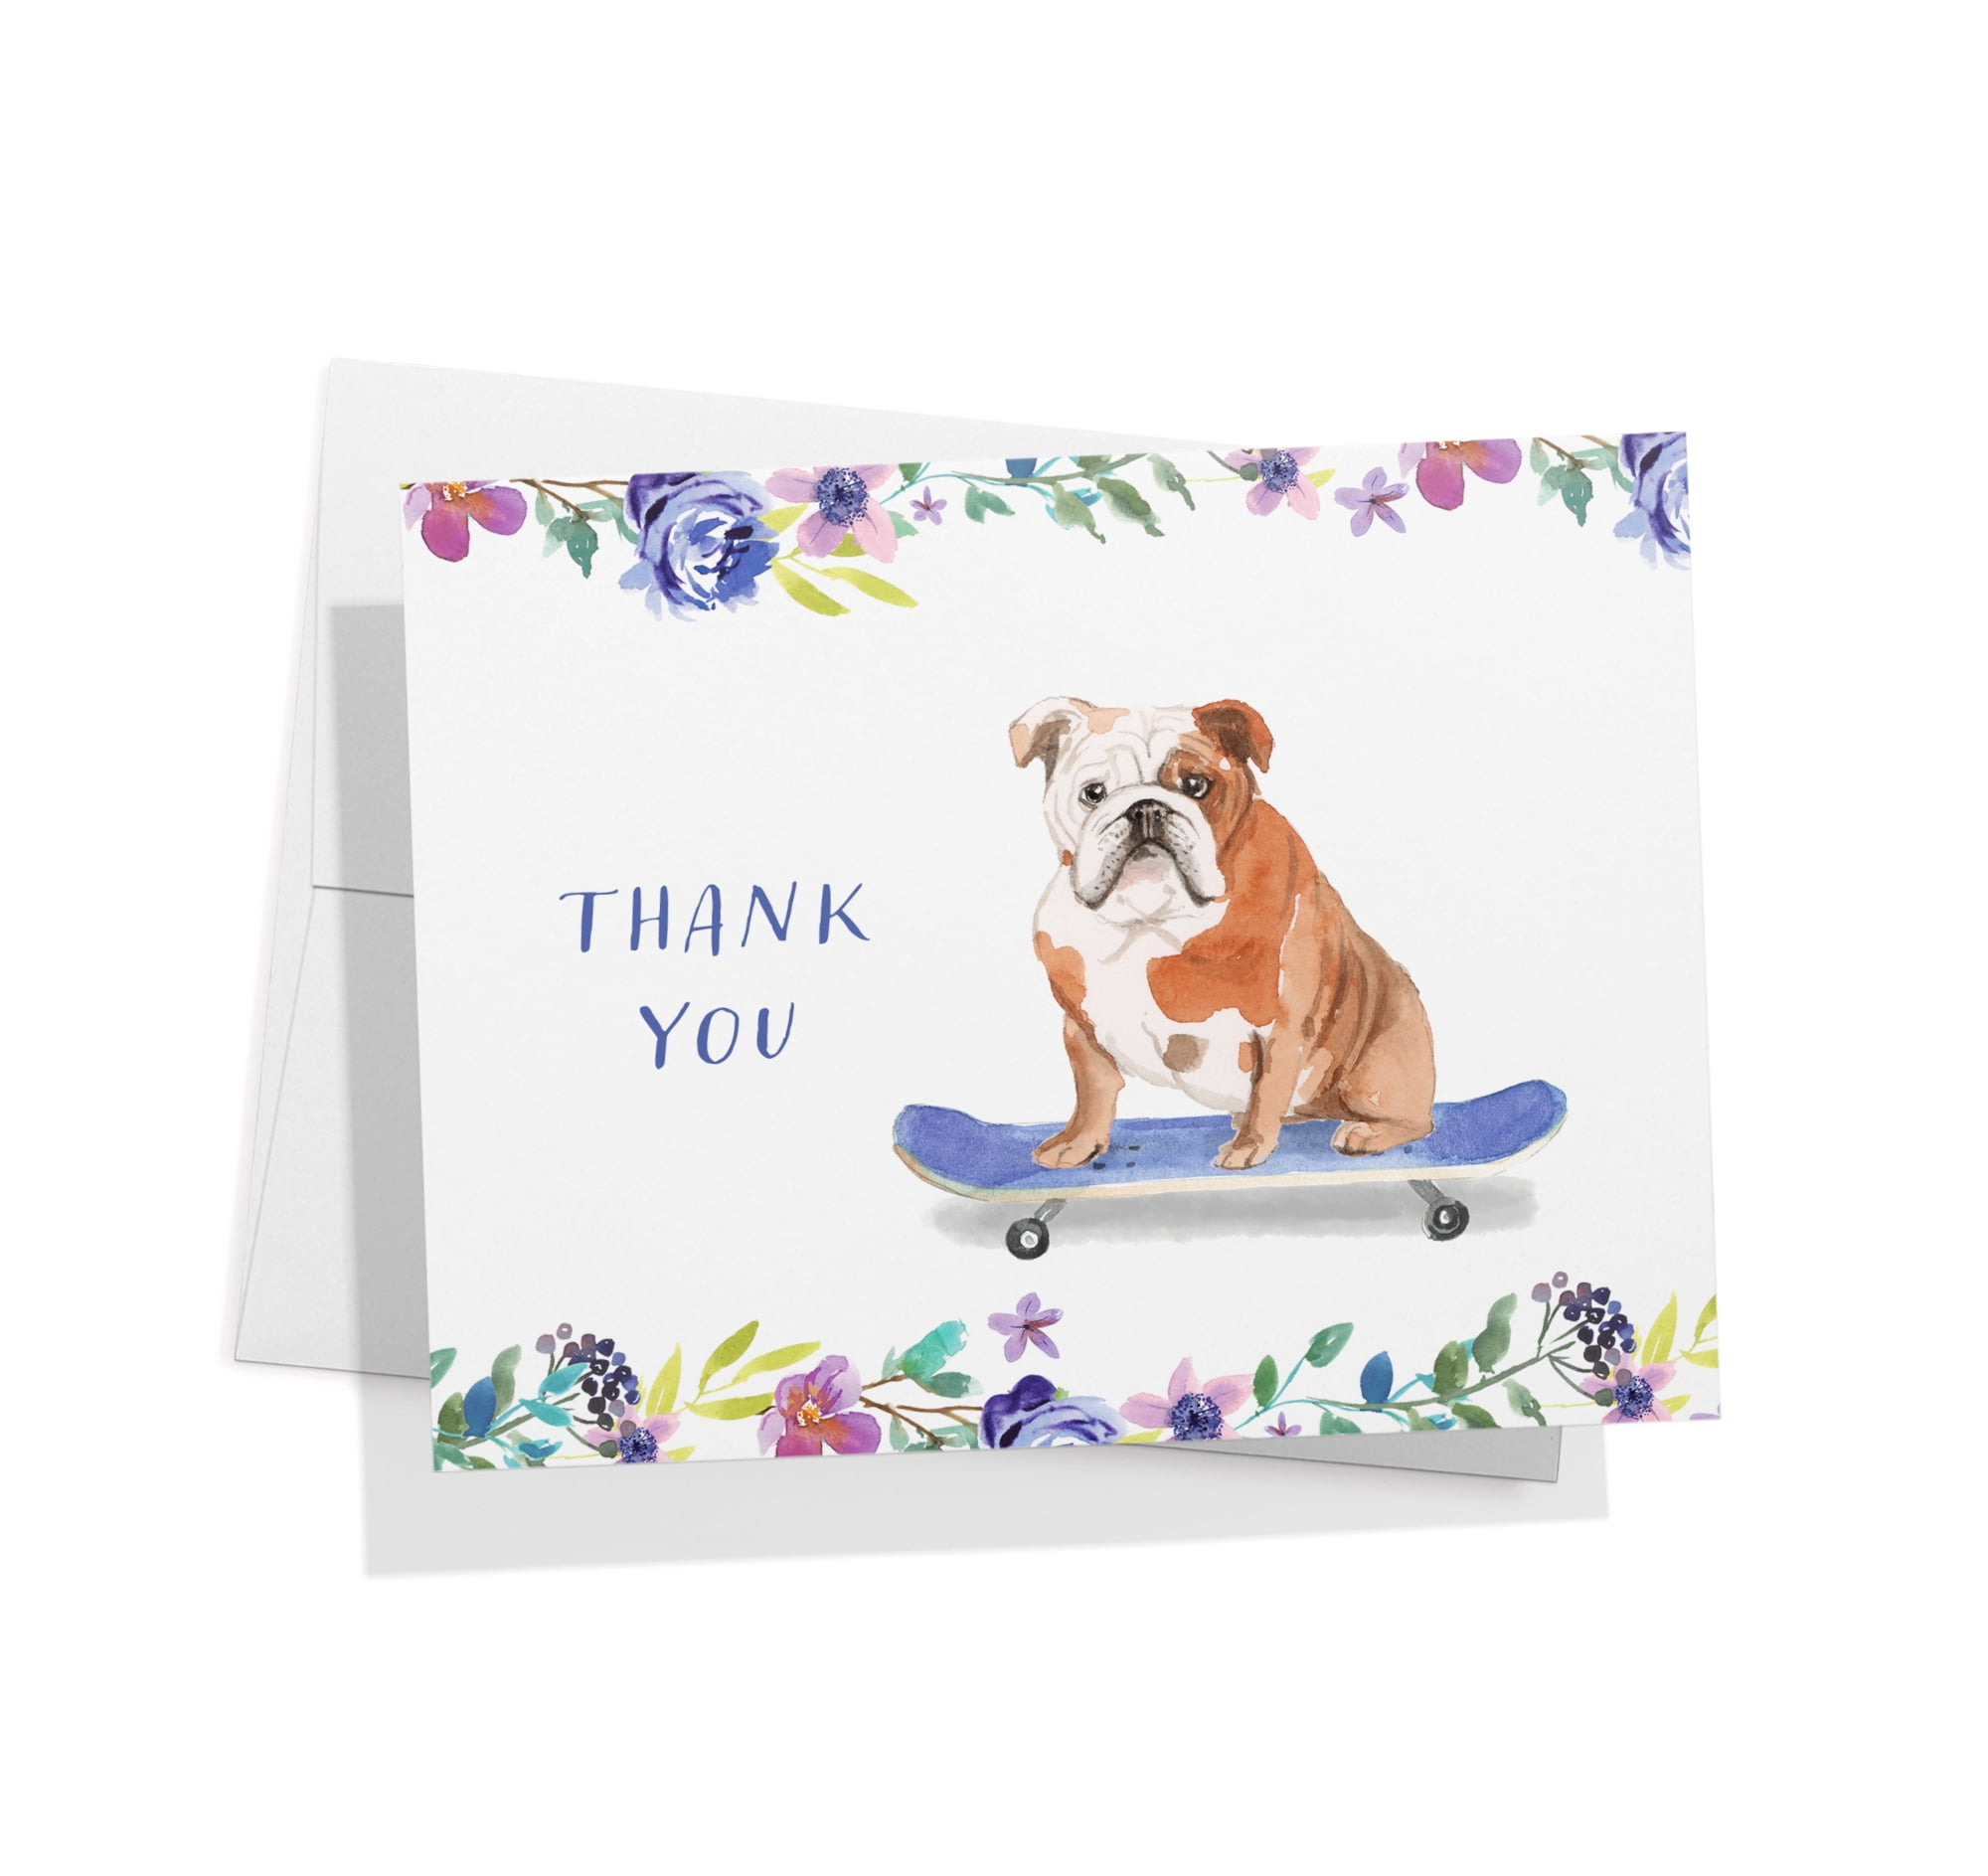 Thank You Cards Pack of 20 Blank Inside Dog in Cup Hallmark Stationery New USA 